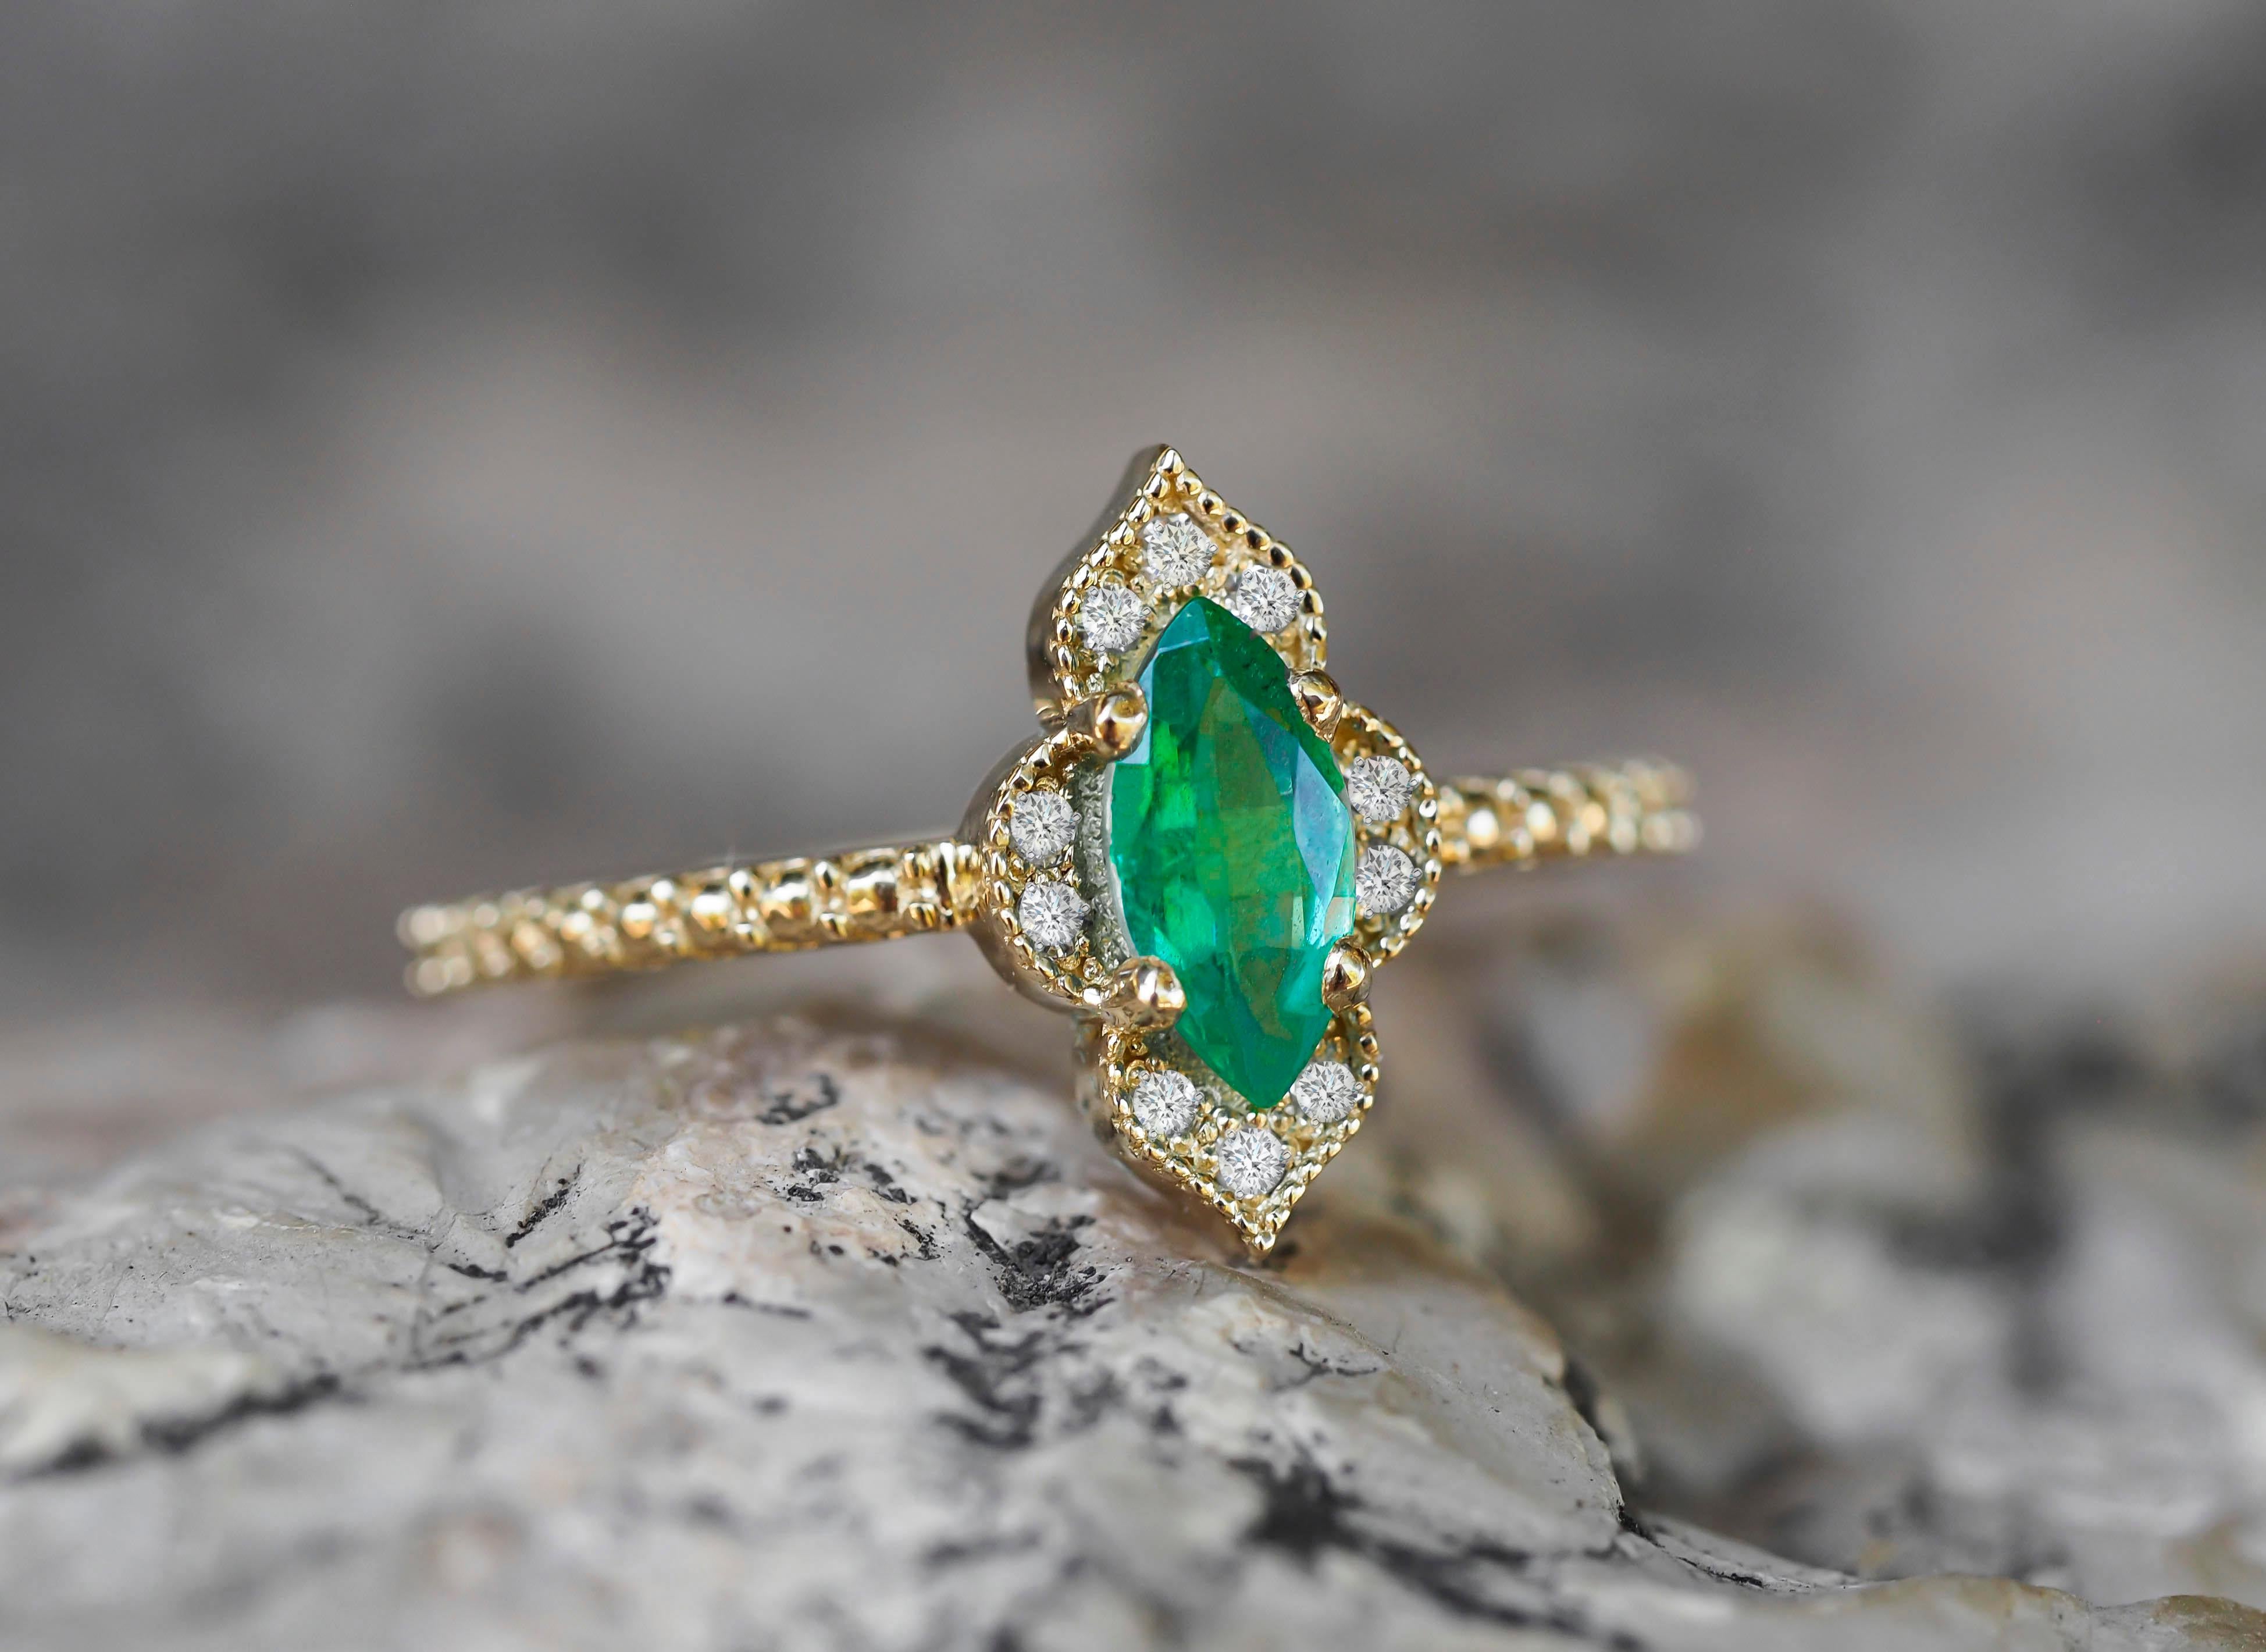 For Sale:  14k Gold Ring with Marquise Cut Emerald and Diamonds 11